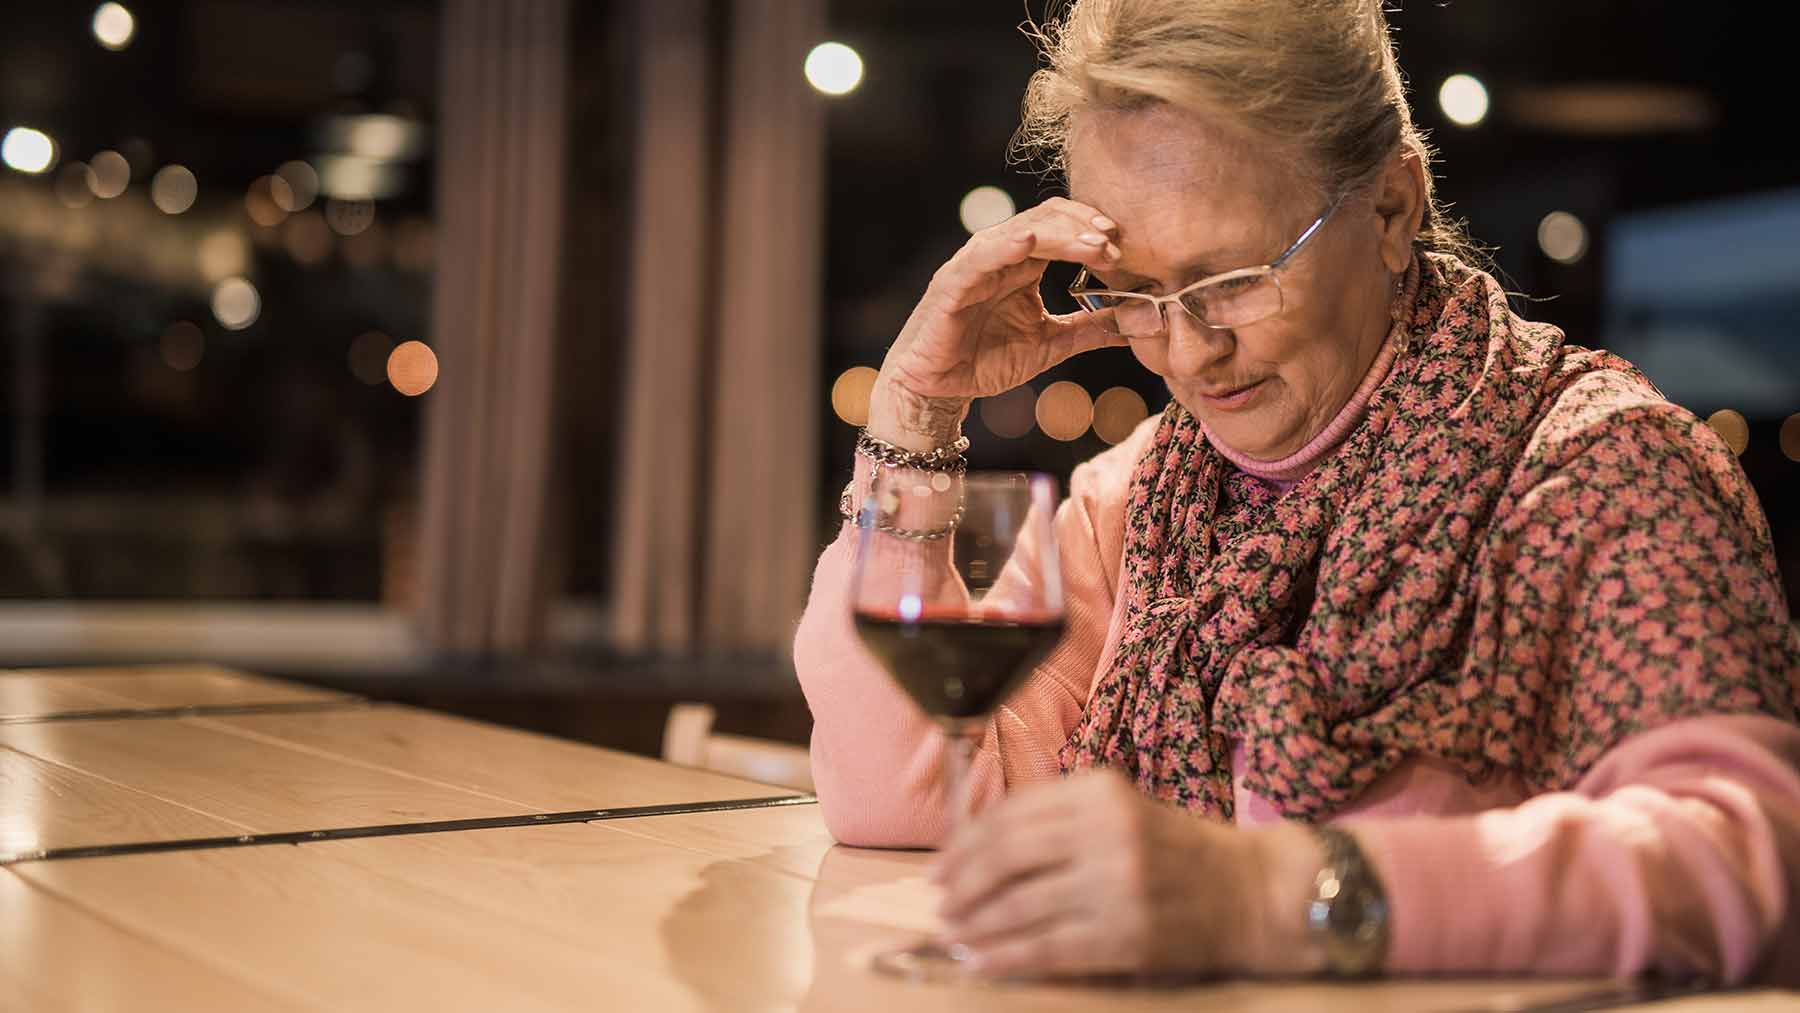 sad, older woman sitting at bar with a drink